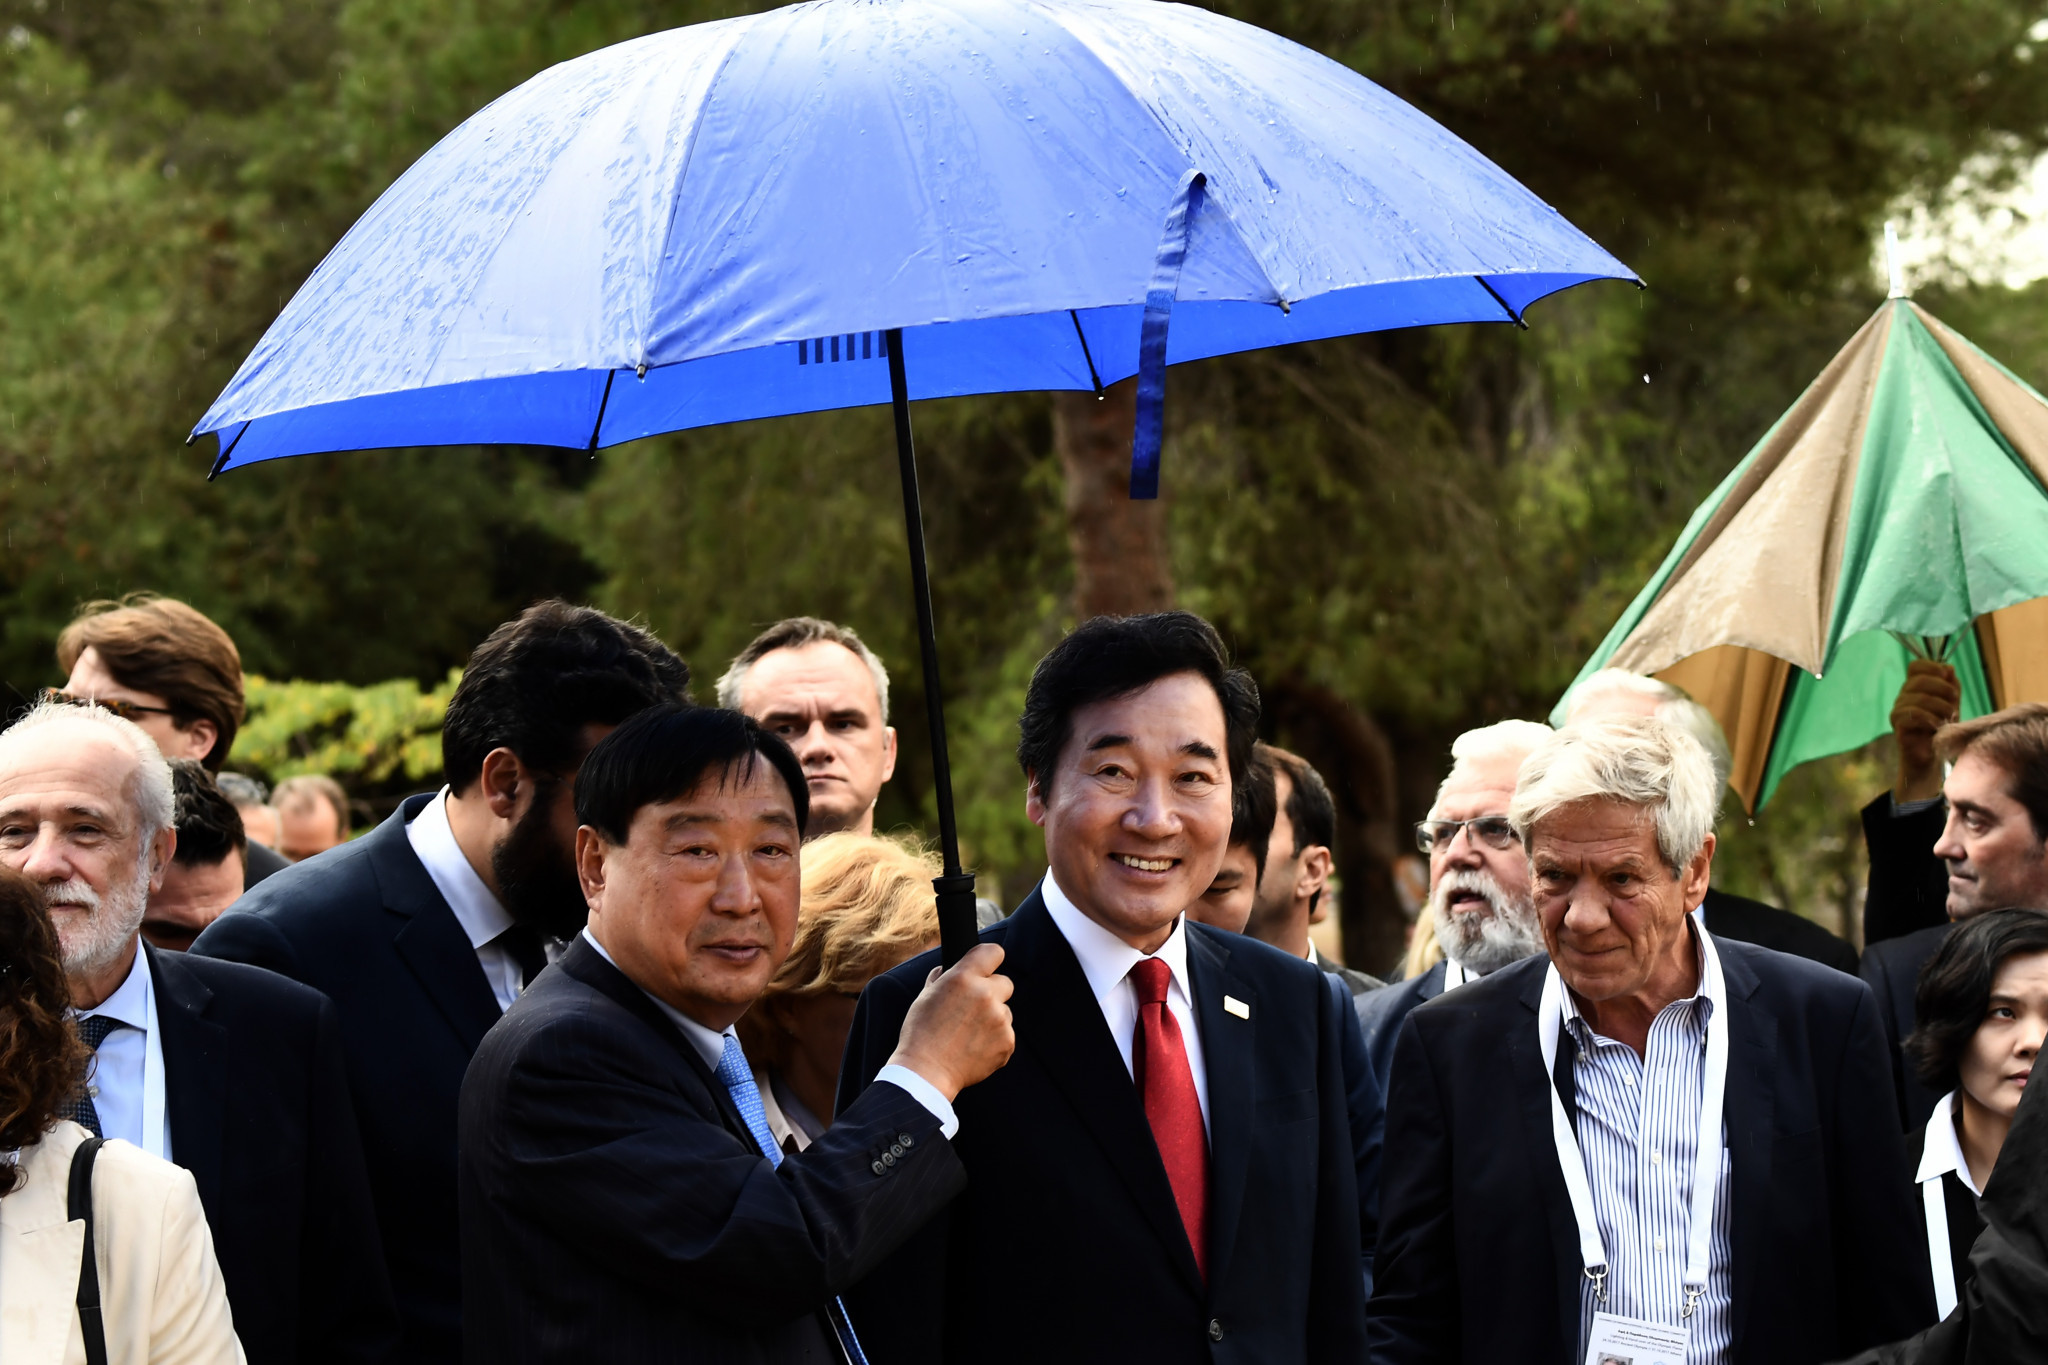 South Korean Prime Minister Lee Nak-yeon attended the event, which had come under threat due to showers ©Getty Images